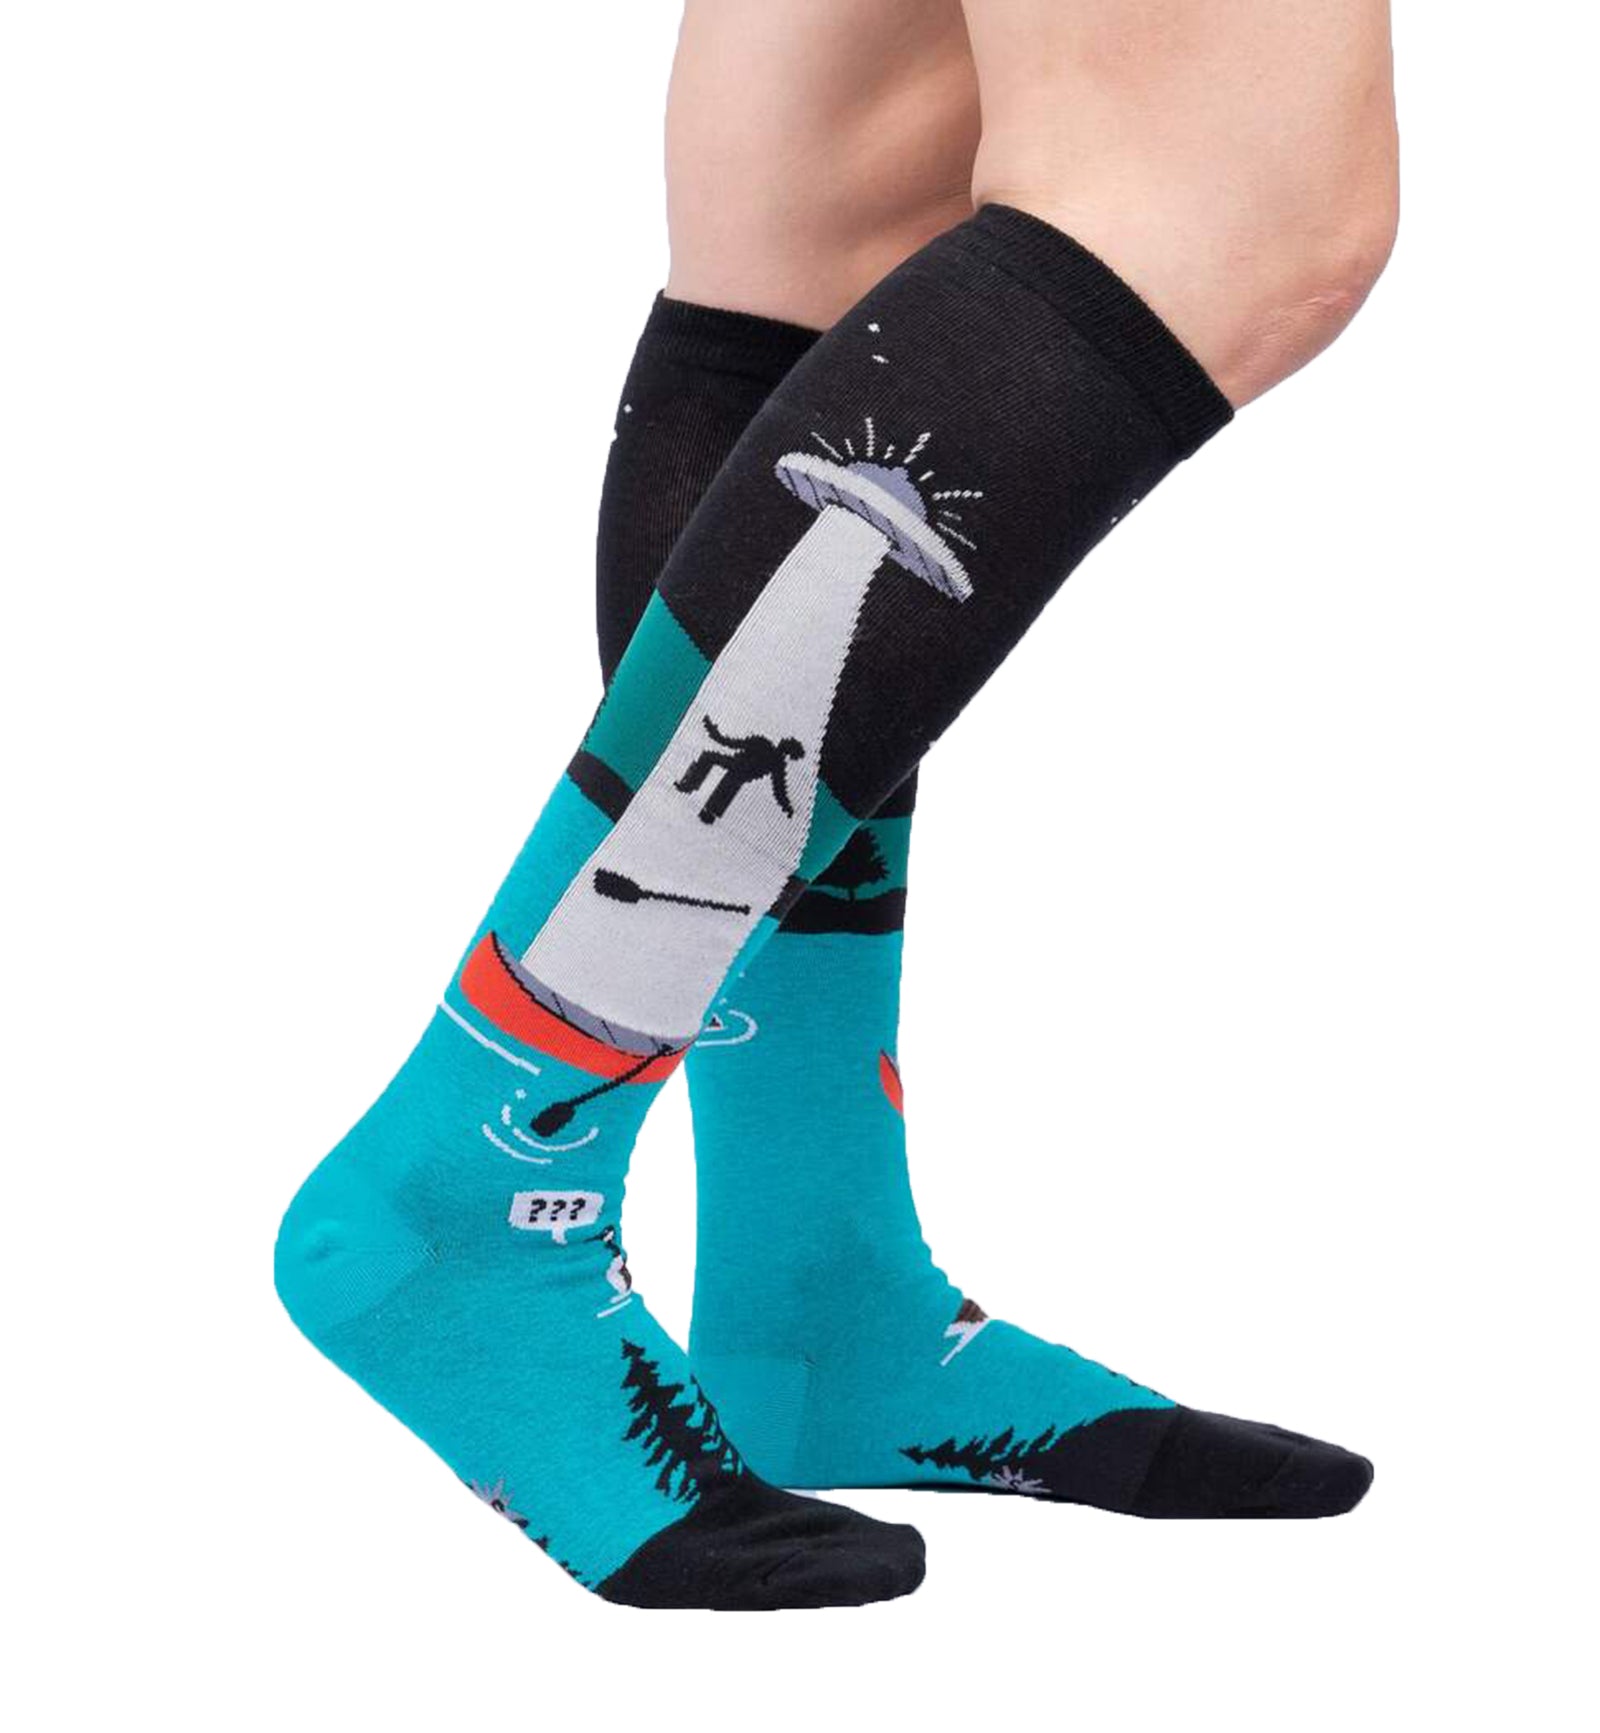 SOCK it to me Unisex Knee High Socks (F0619),Out of Boaty Experience - Out of Boaty Experience,One Size